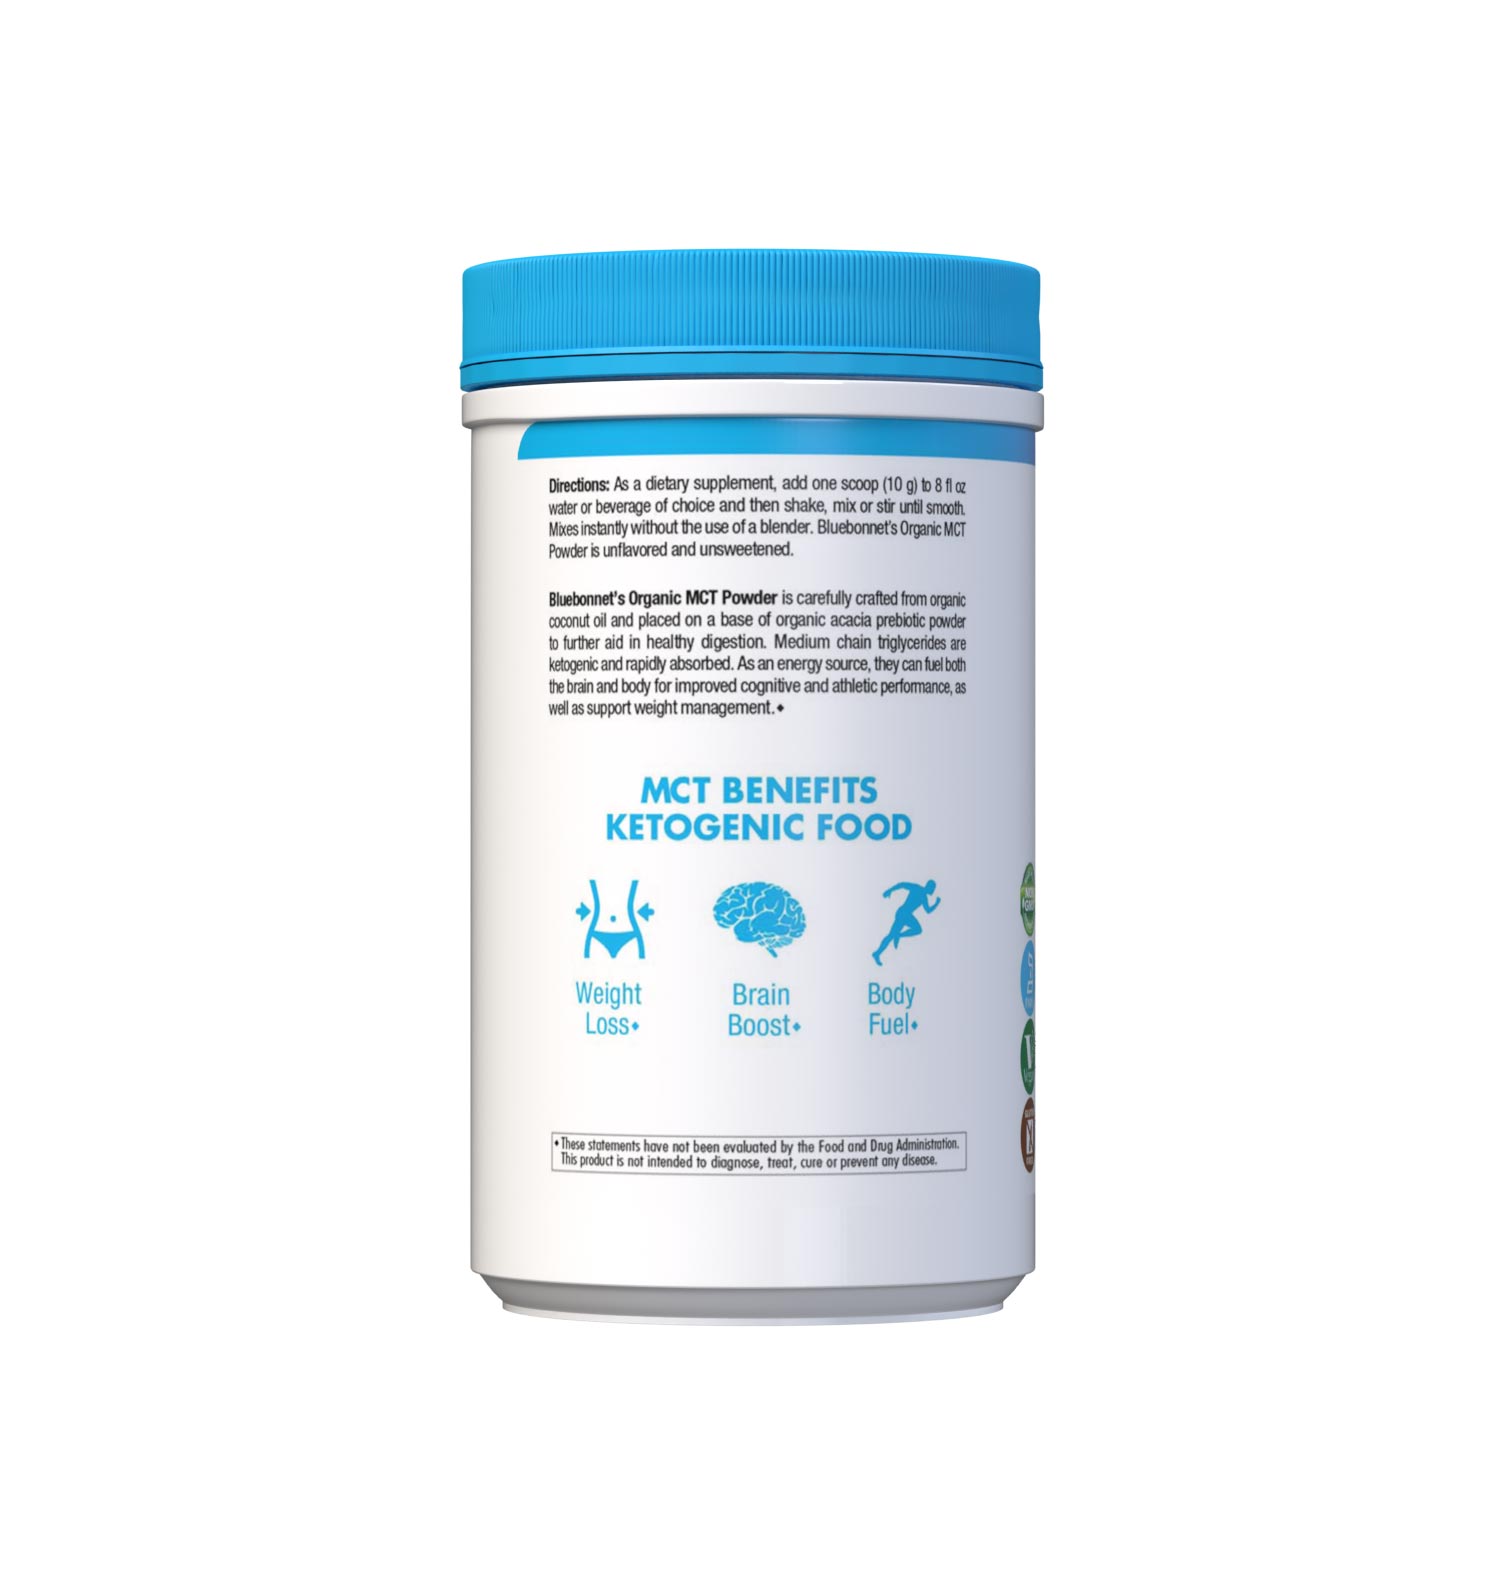 Bluebonnet’s Organic MCT Powder (10.58 oz canister) is carefully crafted from organic coconut oil and placed on a base of organic acacia prebiotic powder to further aid in healthy digestion. Medium chain triglycerides are ketogenic and rapidly absorbed. As an energy source, they can fuel both the brain and body for improved cognitive and athletic performance, as well as support weight management. Description panel. #size_10.58 oz